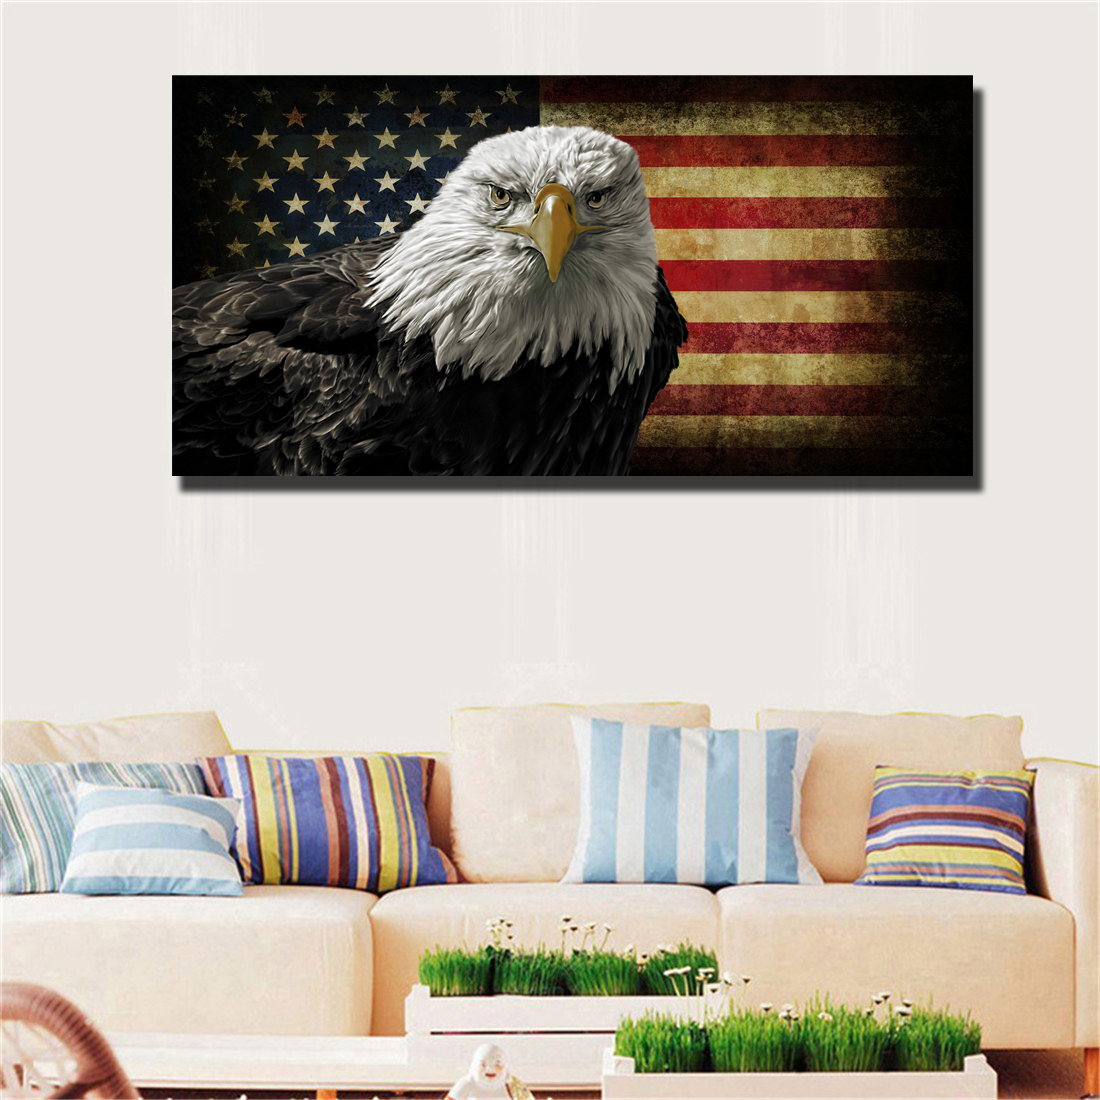 

Wall Pictures for Living Room Oil Painting Posters prints On Canvas Wall Deco Wall Decor No Framed #093